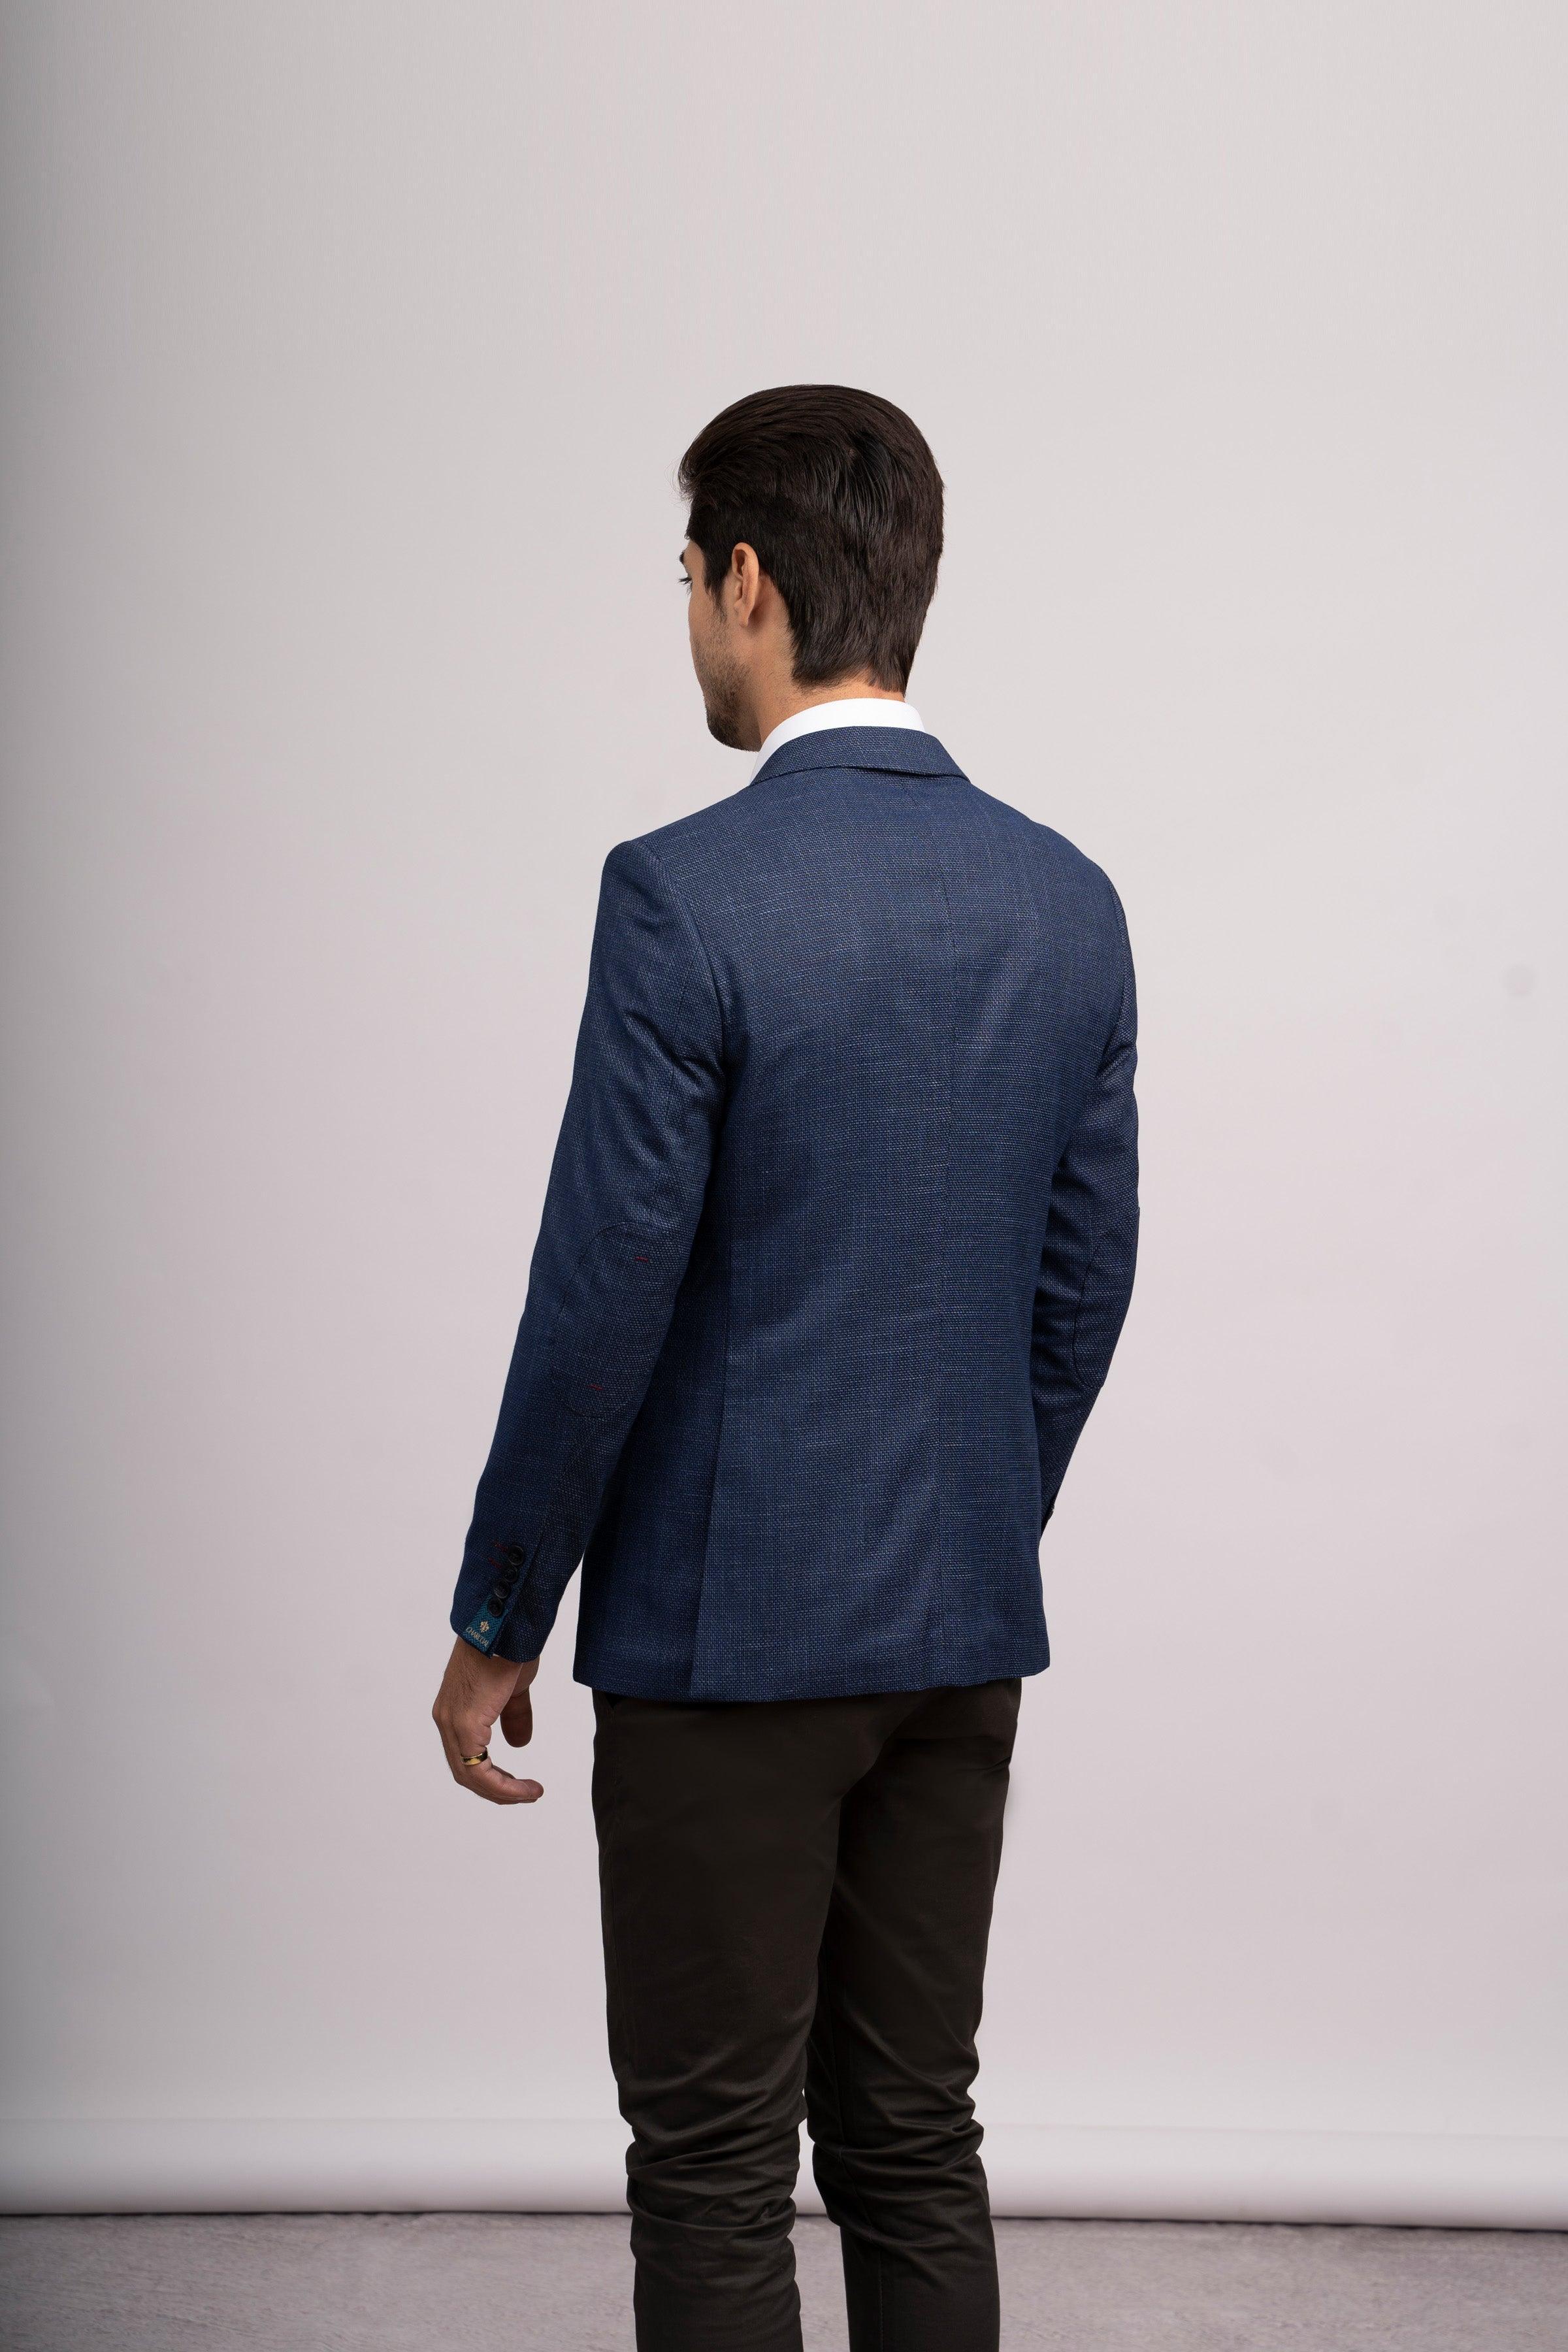 CASUAL COAT SLIM FIT NAVY BLUE at Charcoal Clothing